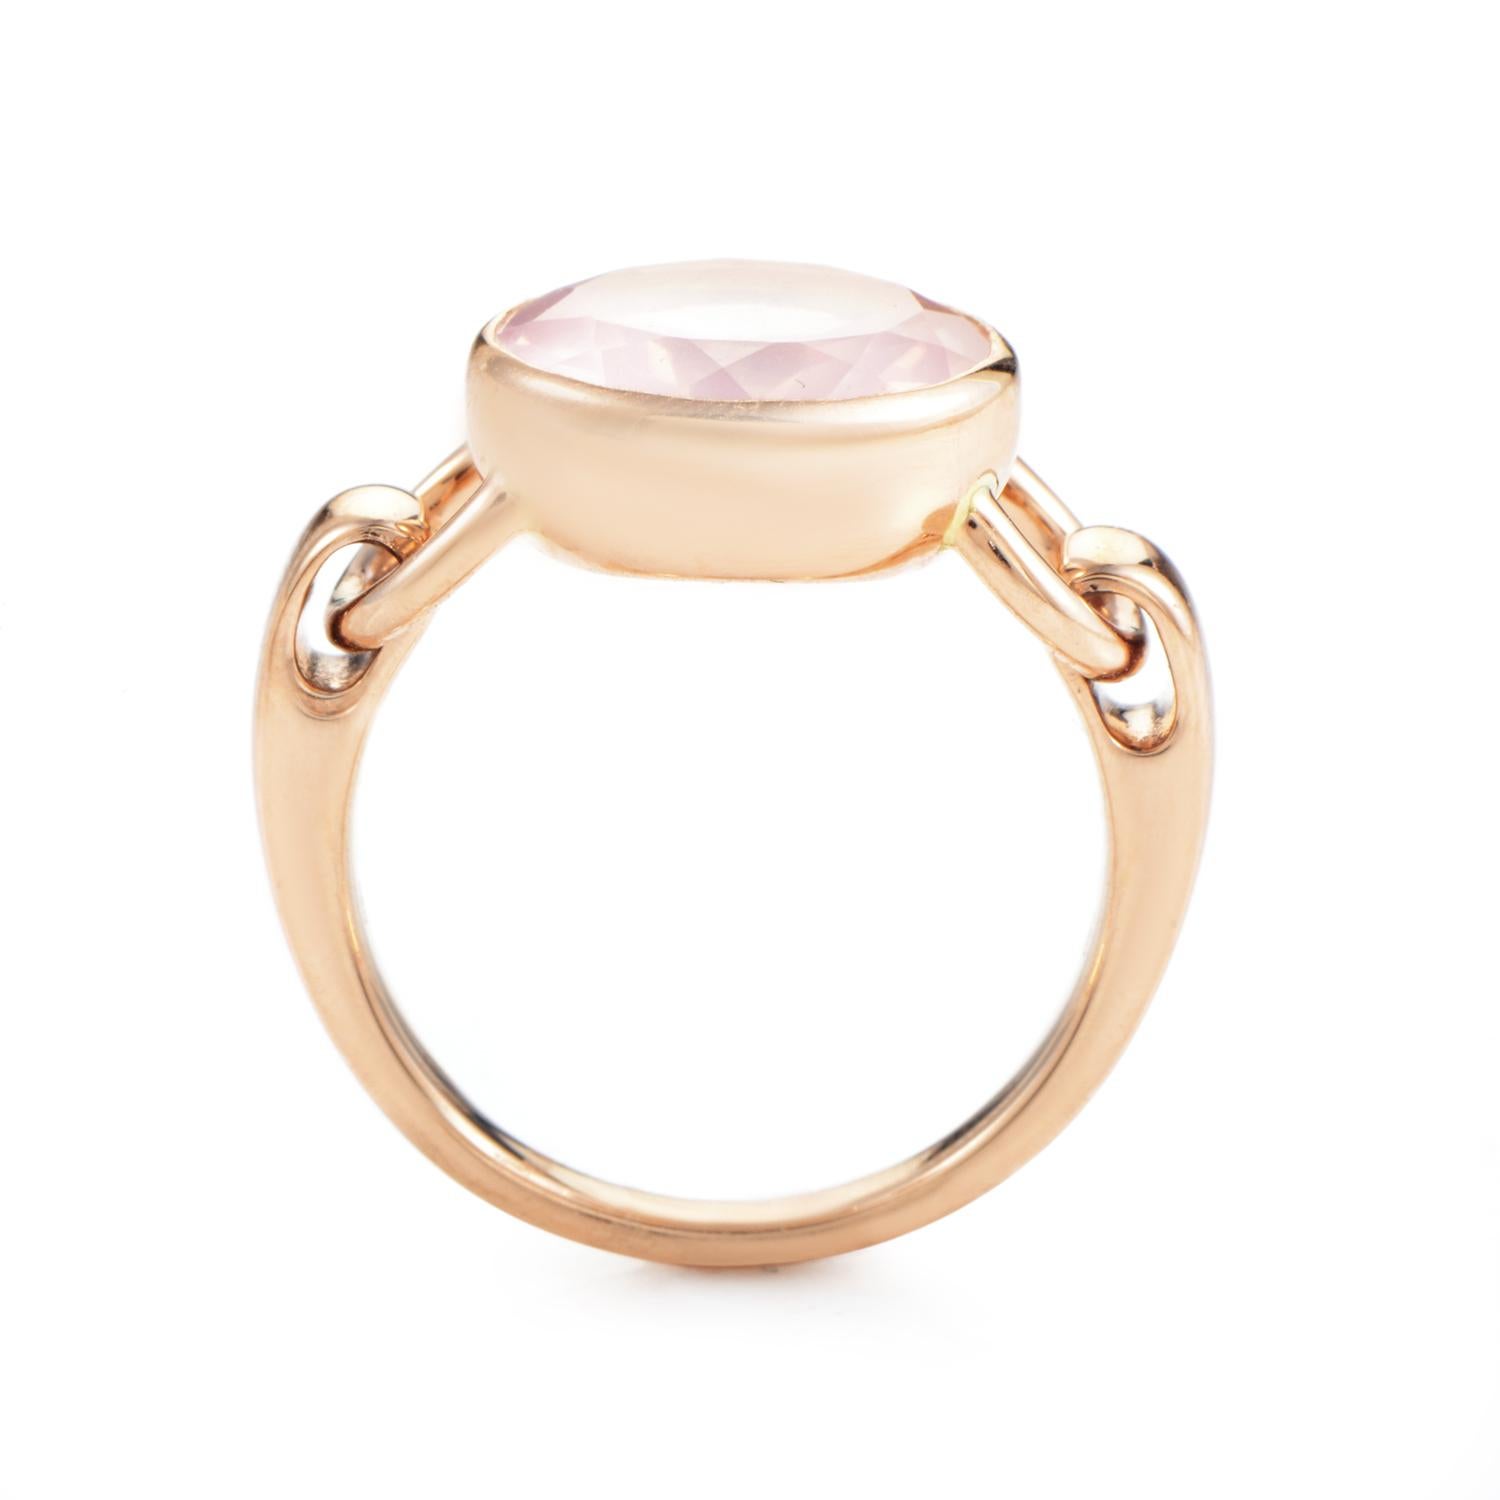 This gently romantic Poiray ring is a precious example of playful glamour. The ring is made of 18K rose gold that is specially designed with hinges for a smooth, movable, bezel setting. A faceted pink quartz totaling ~3.50ct is beautifully